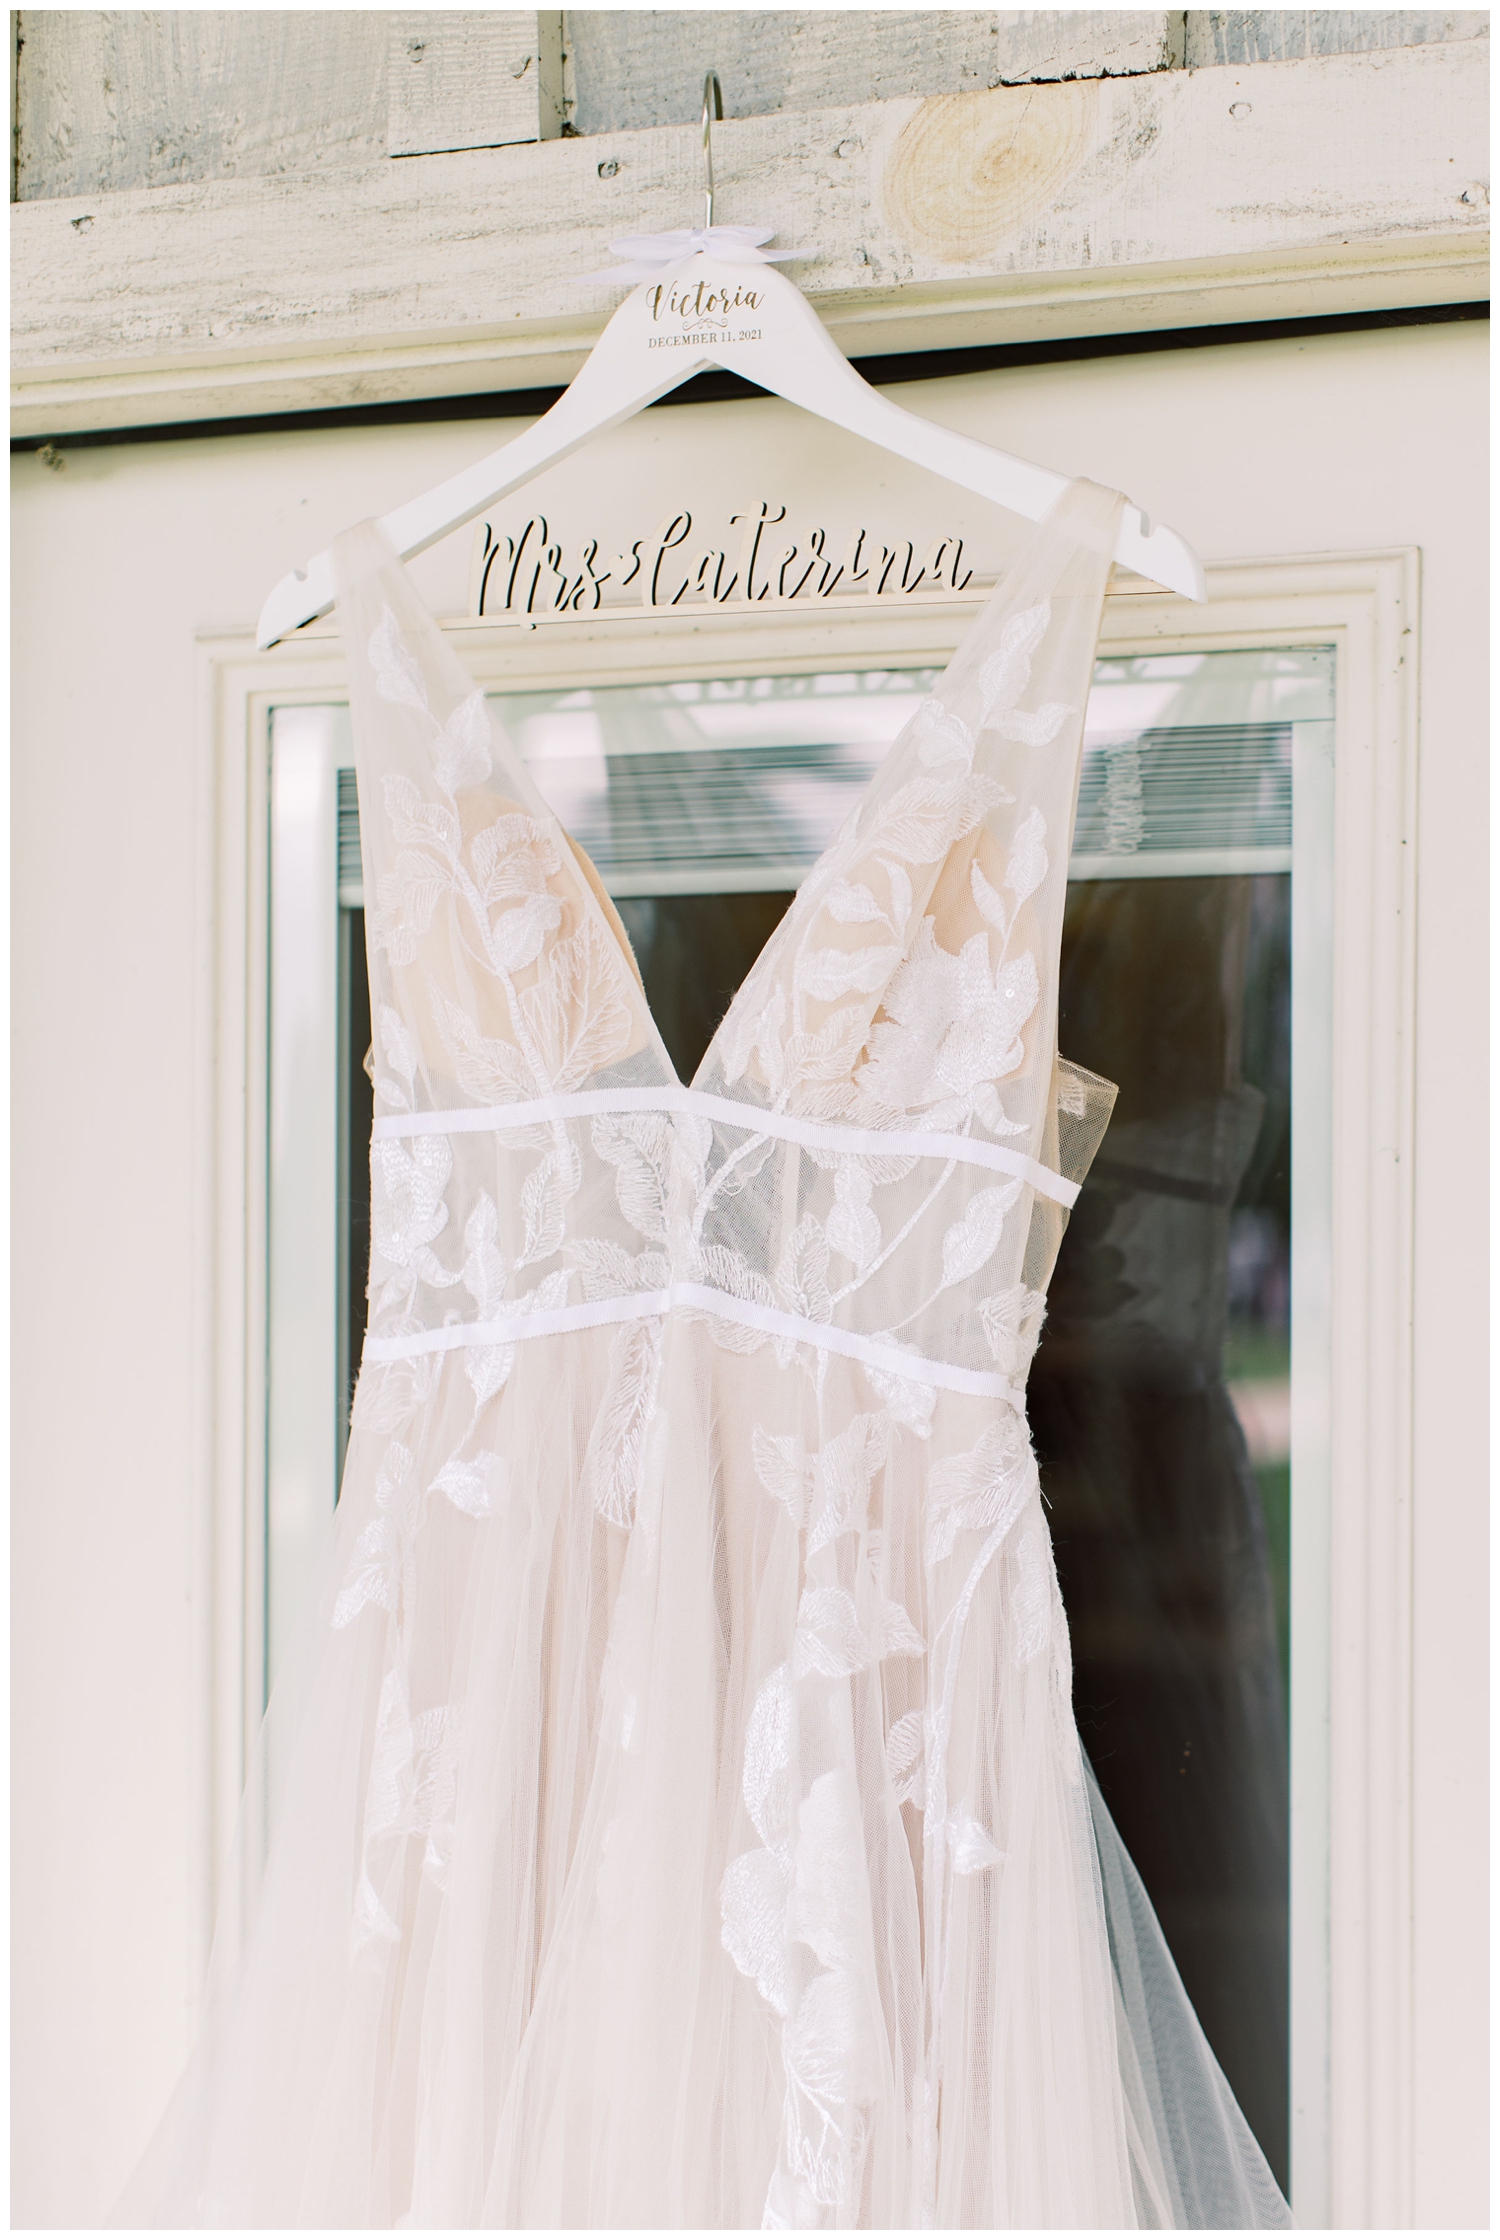 wedding gown hanging with personalized wedding hangar